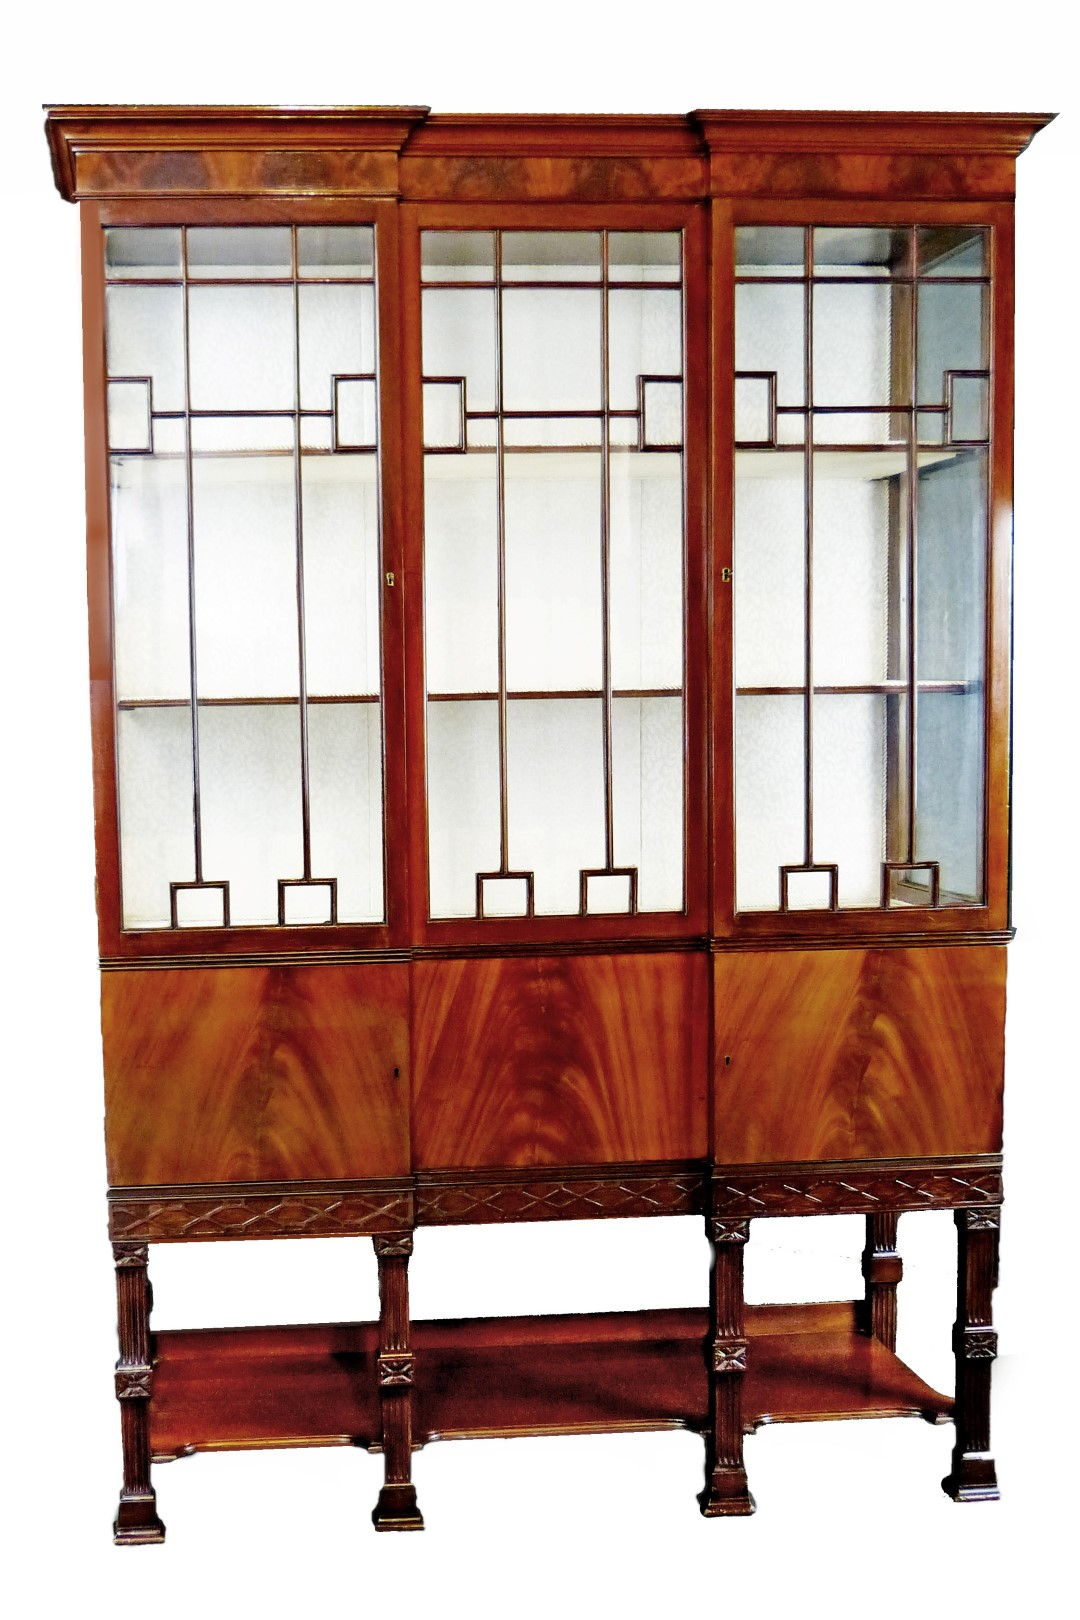 Display Cabinets Display Cabinets Antique Display Cabinet Vitrine